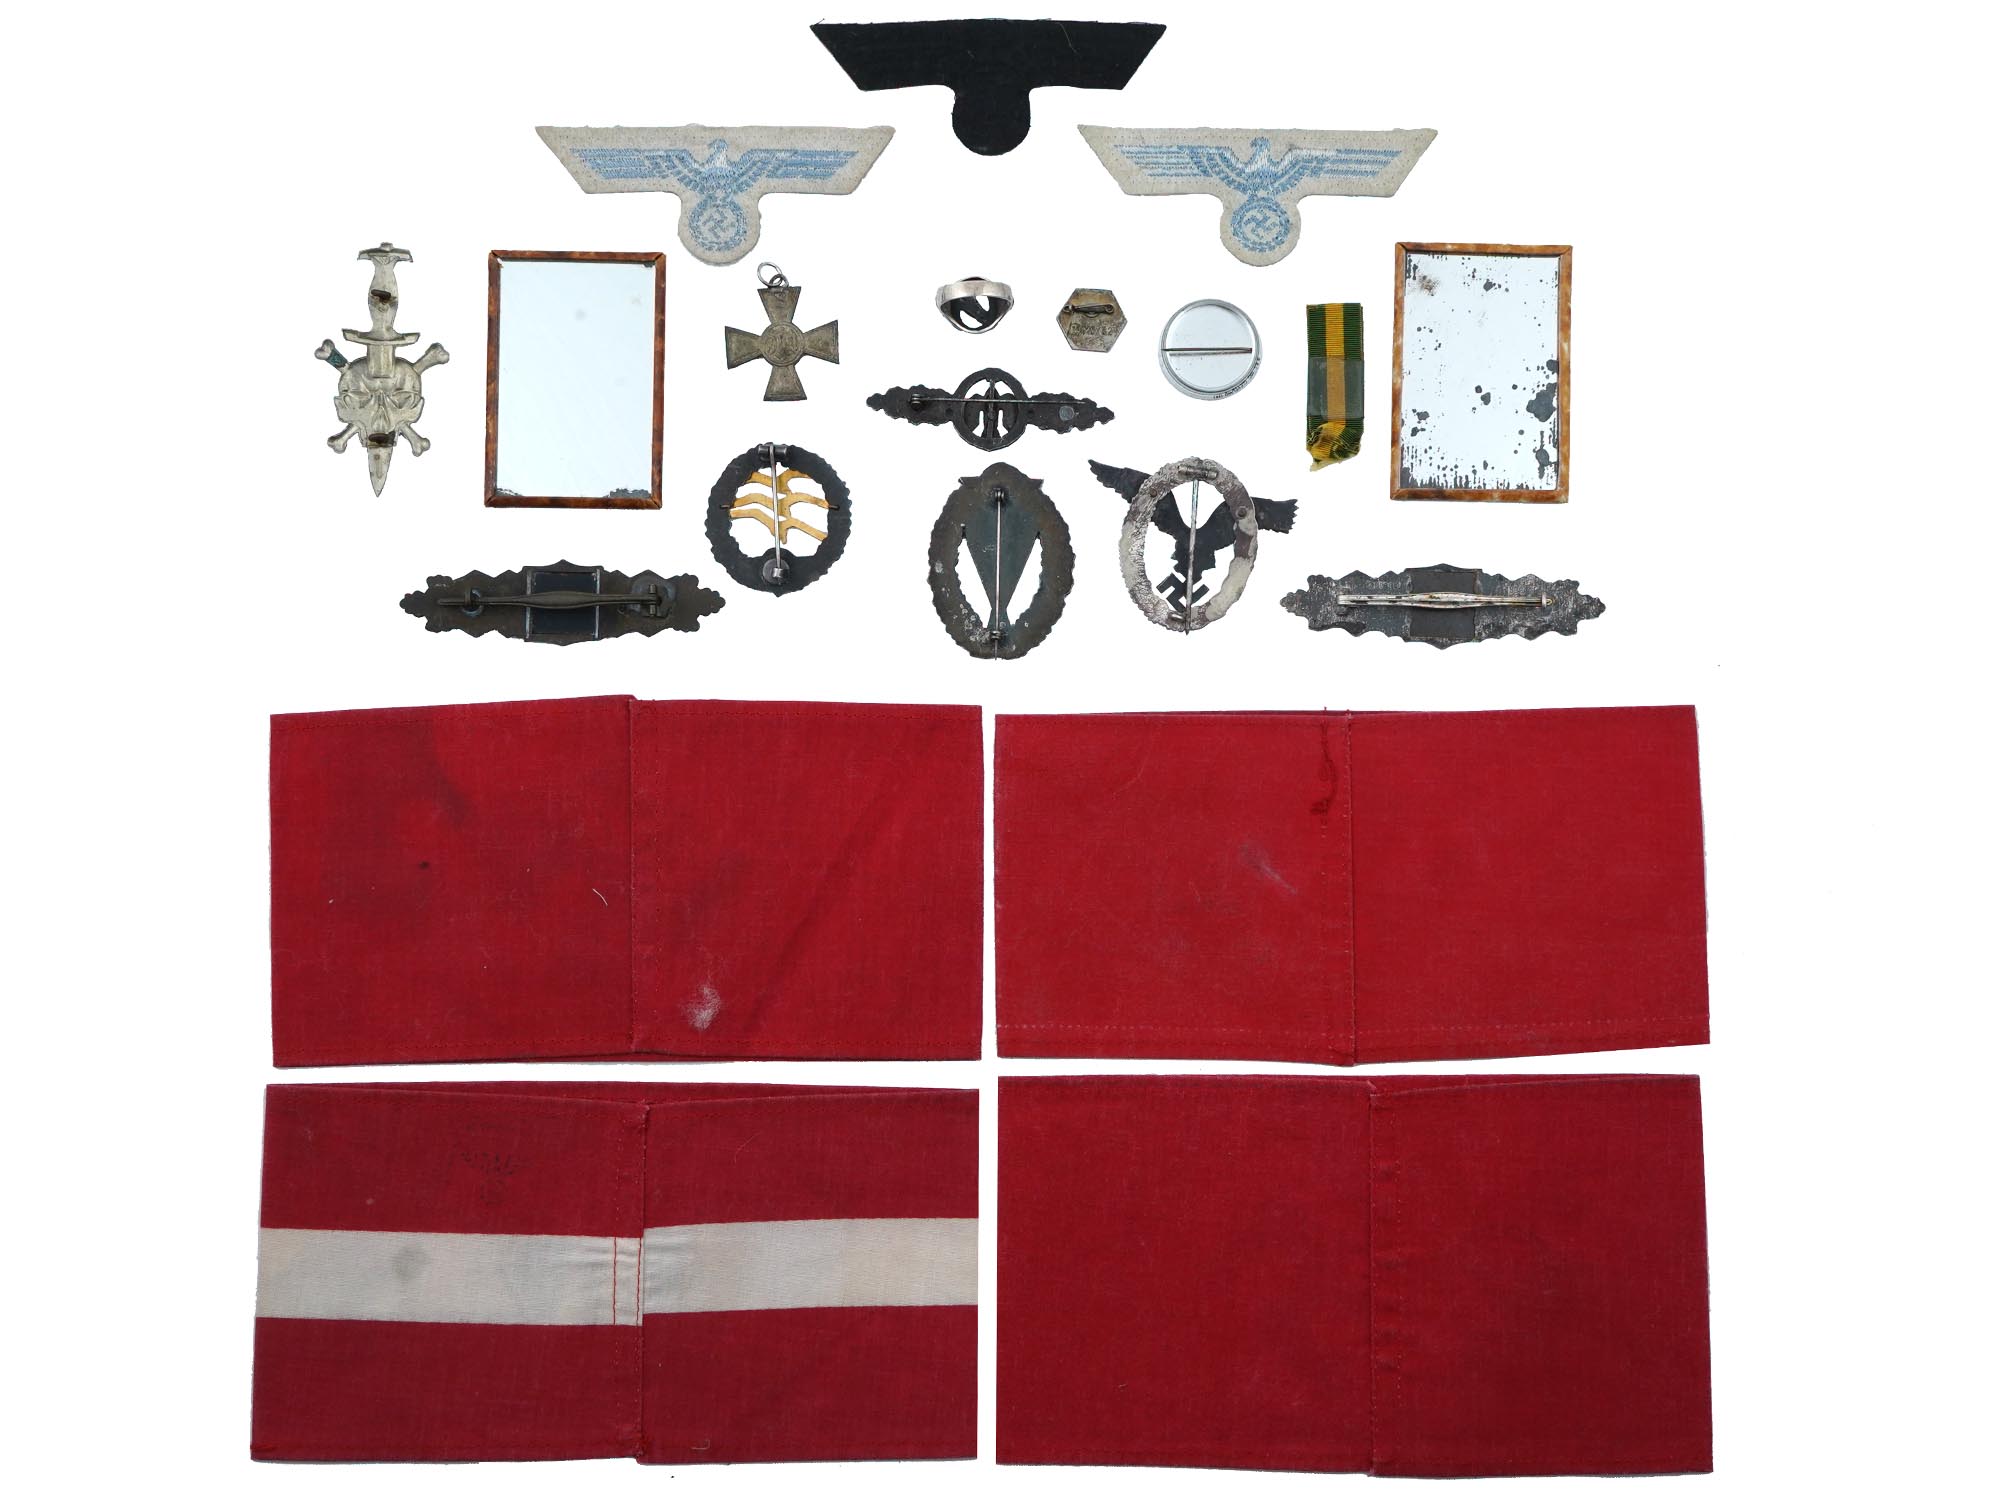 WWII MODEL NAZI GERMAN MILITARY INSIGNIAS AND ARMBANDS PIC-1